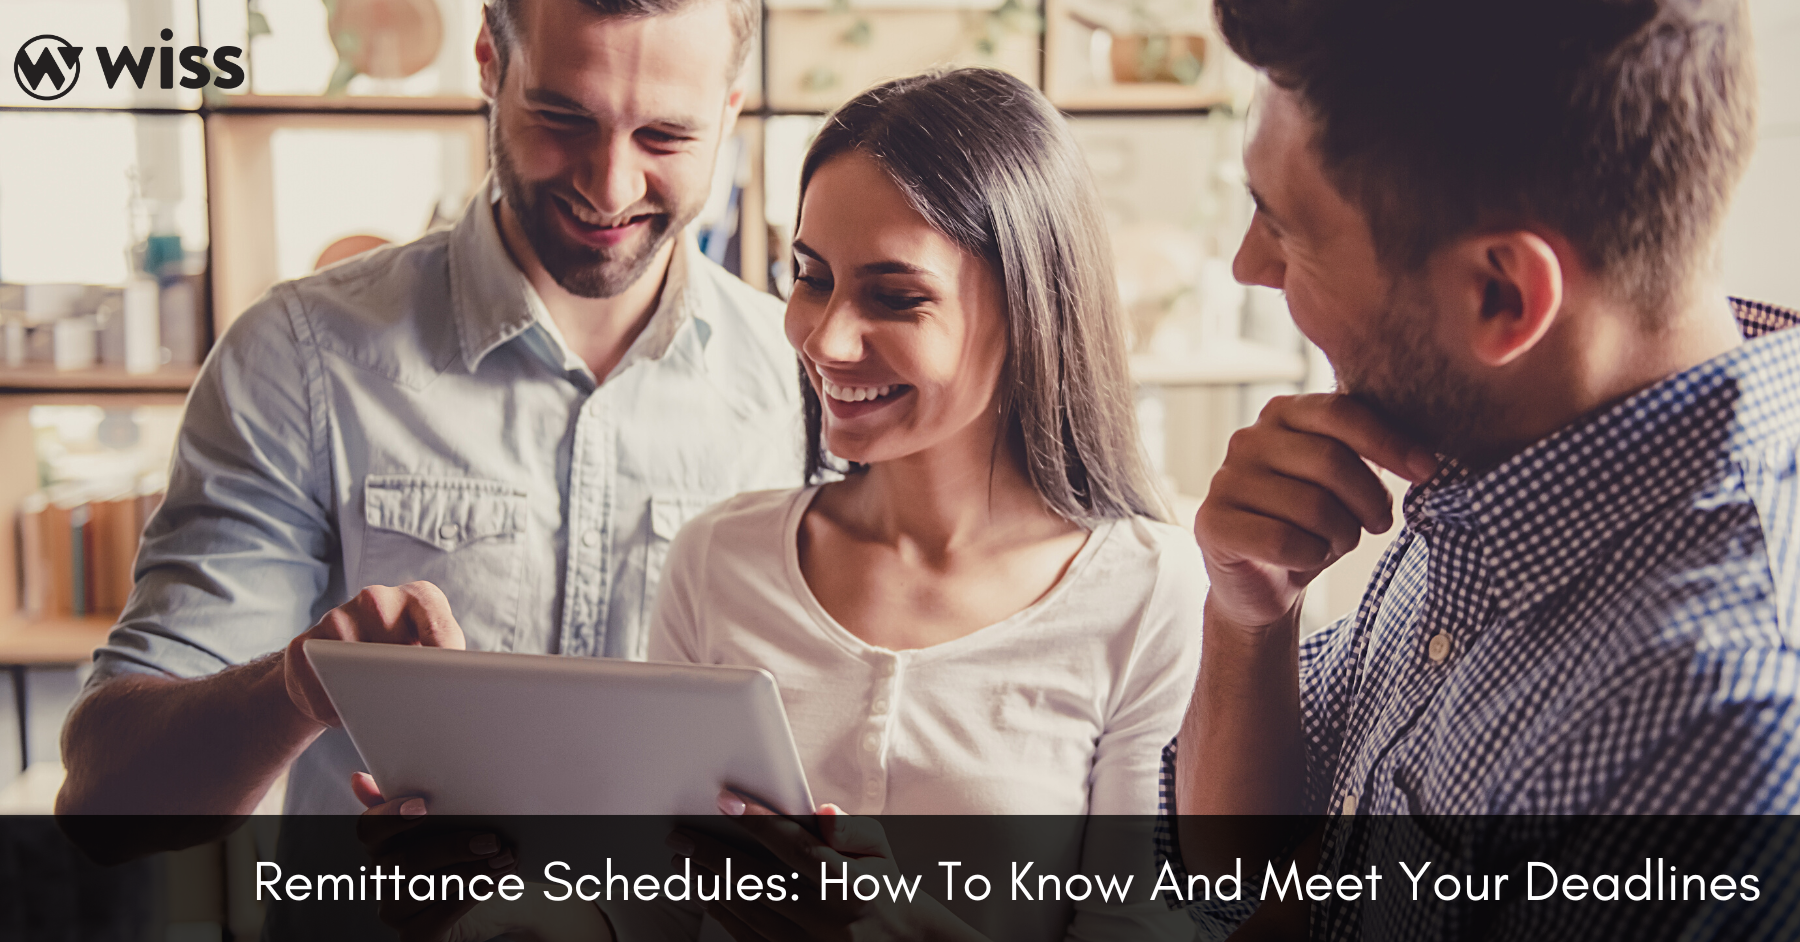 Remittance Schedules: How to Know and Meet Your Deadlines